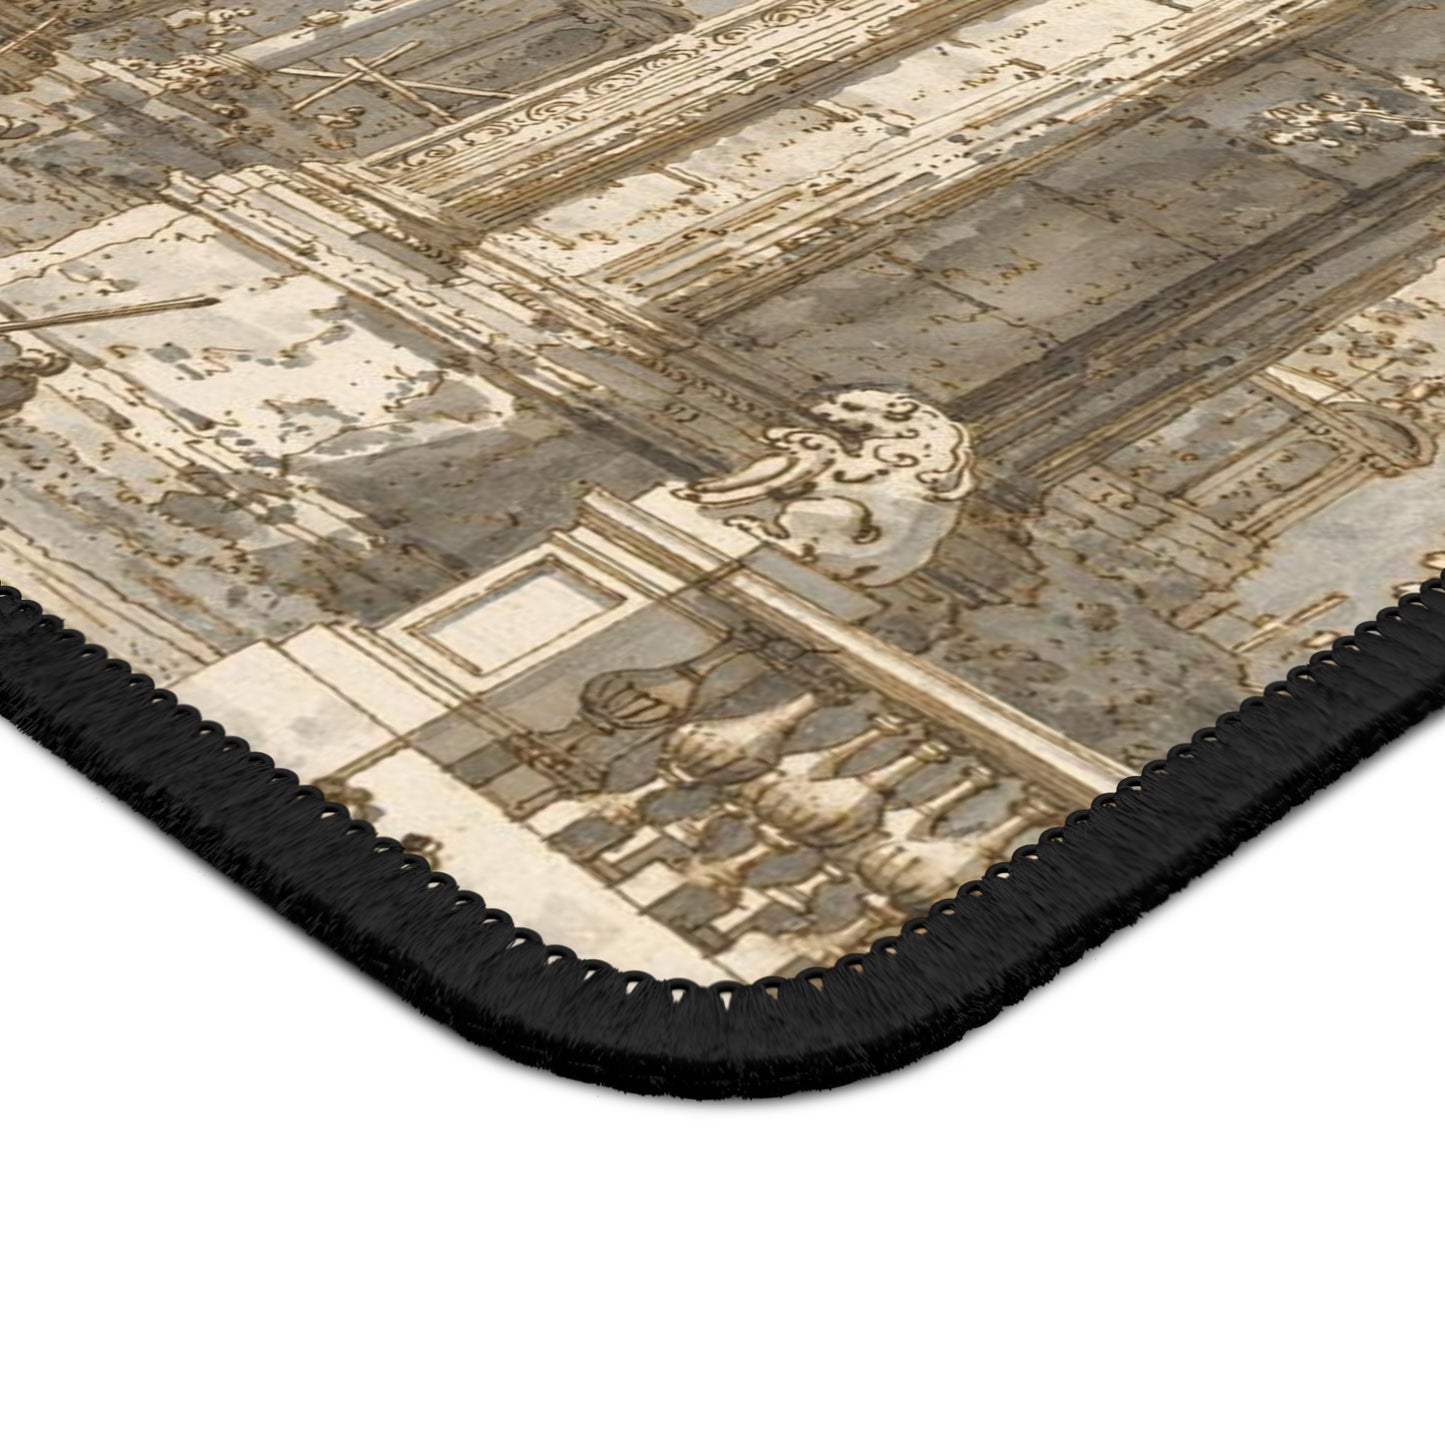 CANALETTO - CAPRICCIO WITH A ROMAN TRIUMPHAL ARCH - GAMING MOUSE PAD